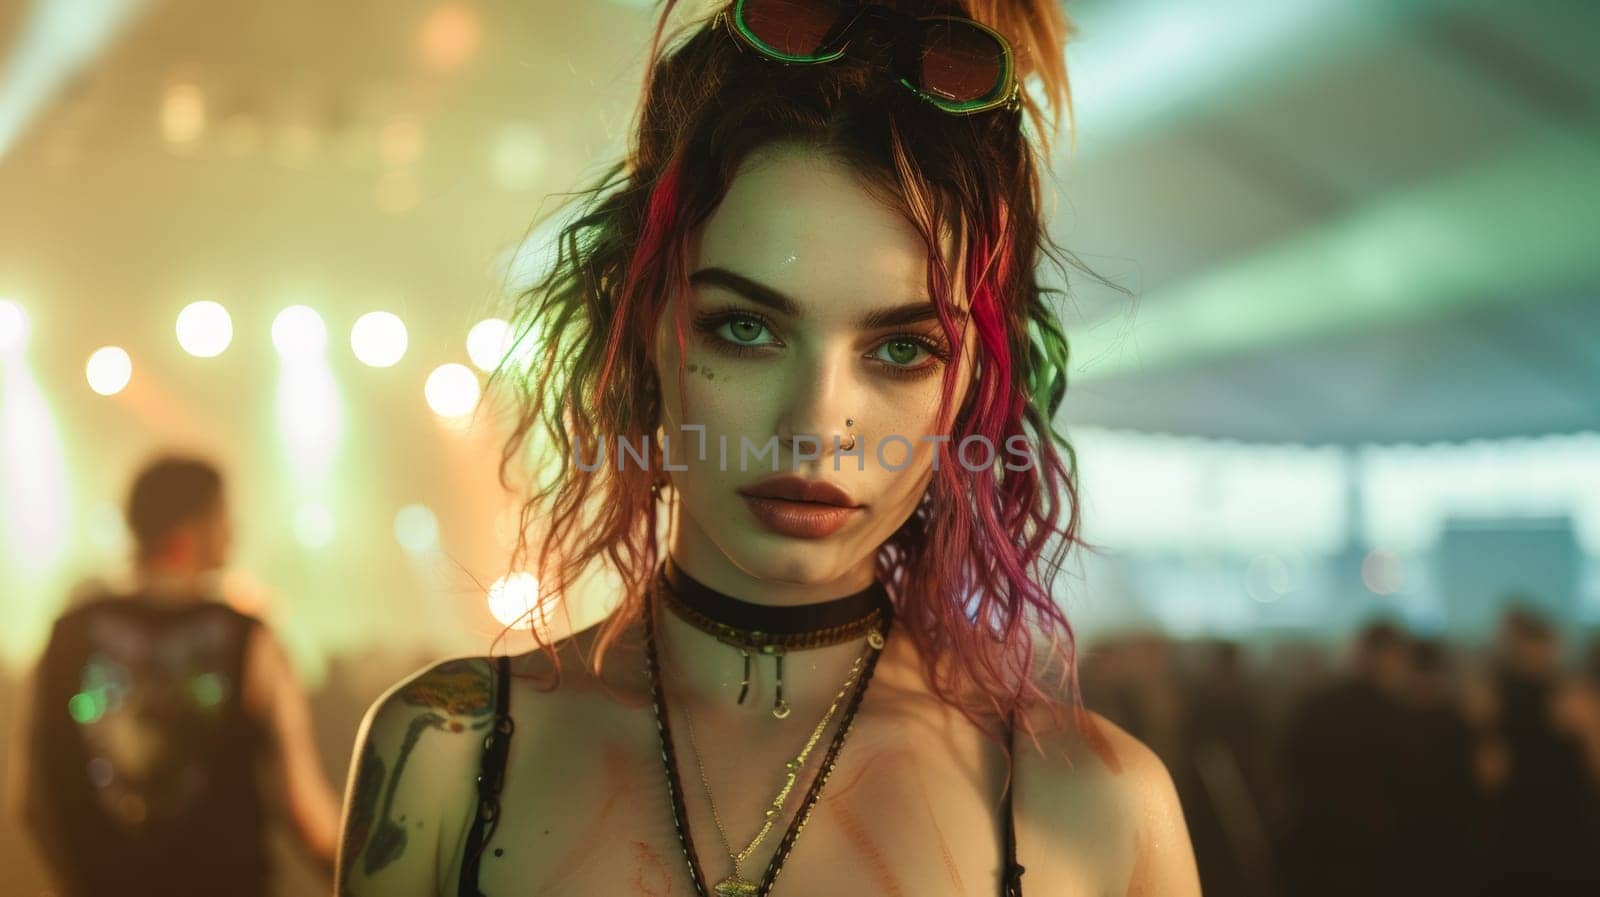 A woman with a tattooed face and piercings standing in front of people, AI by starush